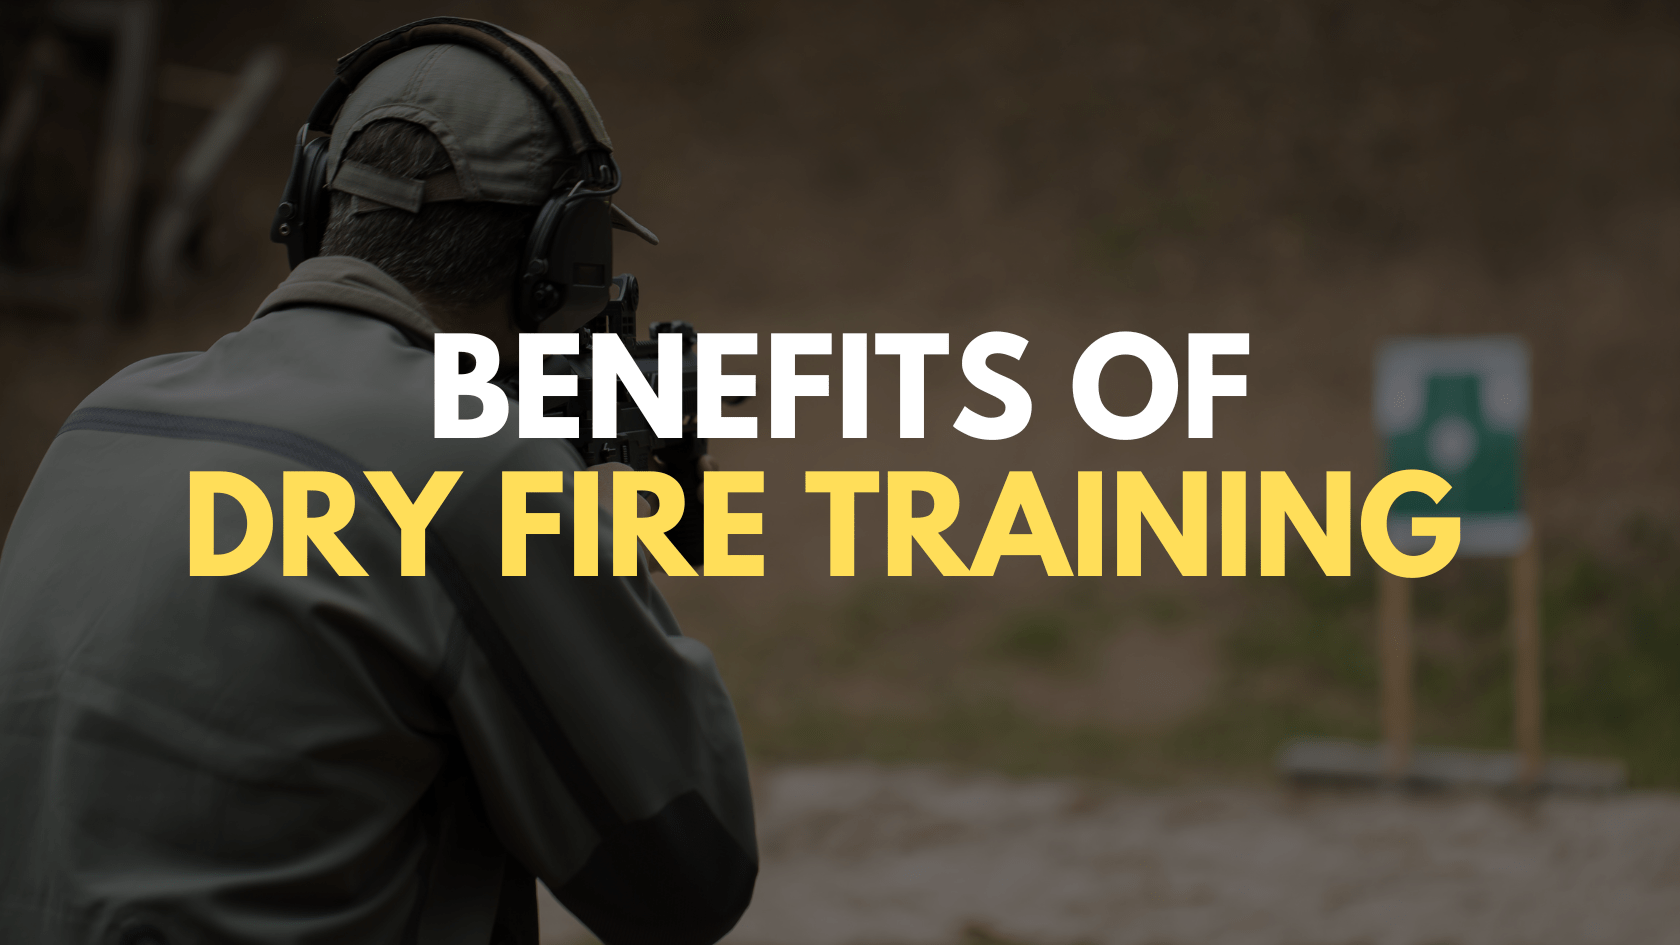 Benefits of dry fire training